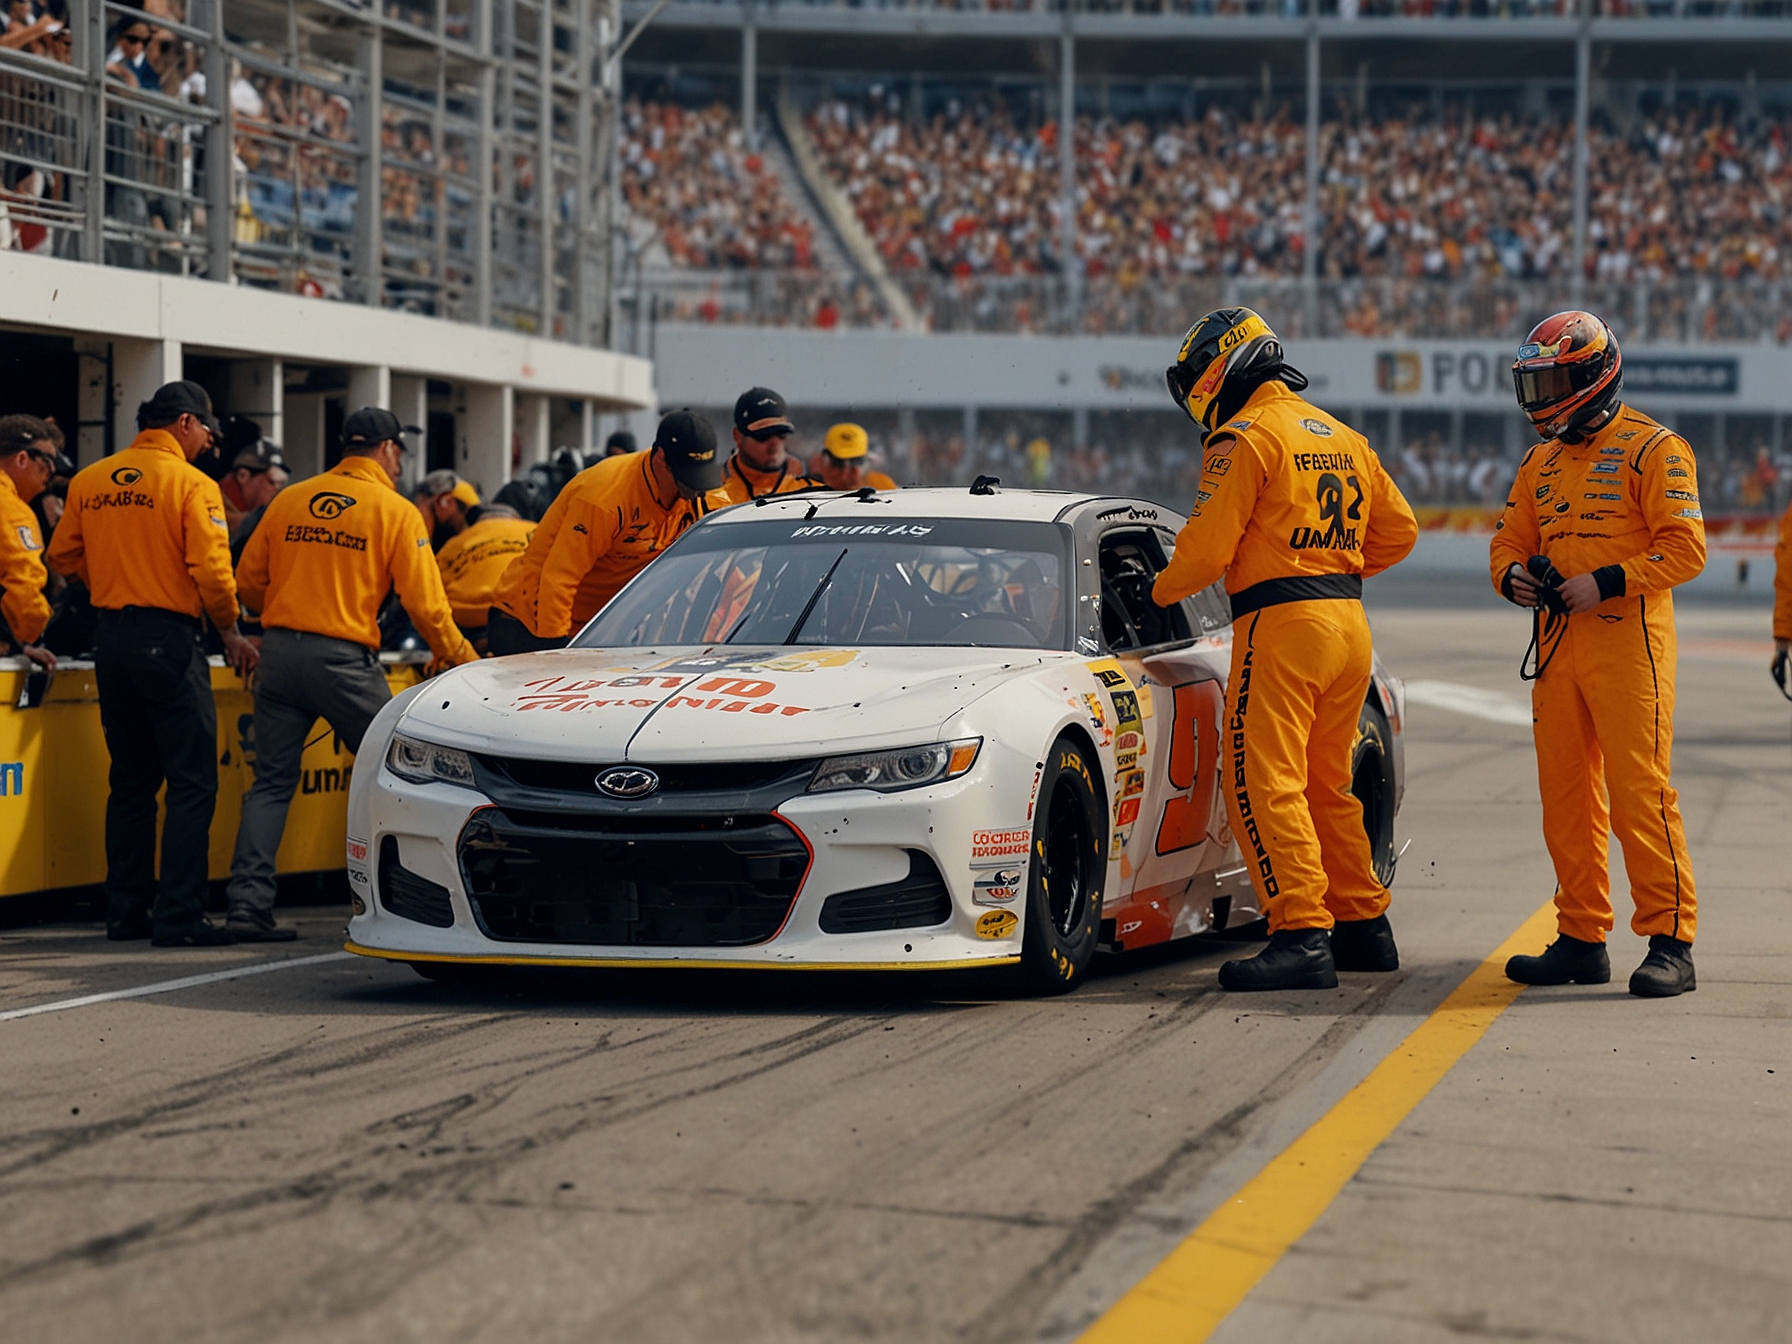 A tense moment during a pit stop for Brandon Jones at a NASCAR Xfinity Series race, capturing the technical and team challenges that have impacted his performance and progress.